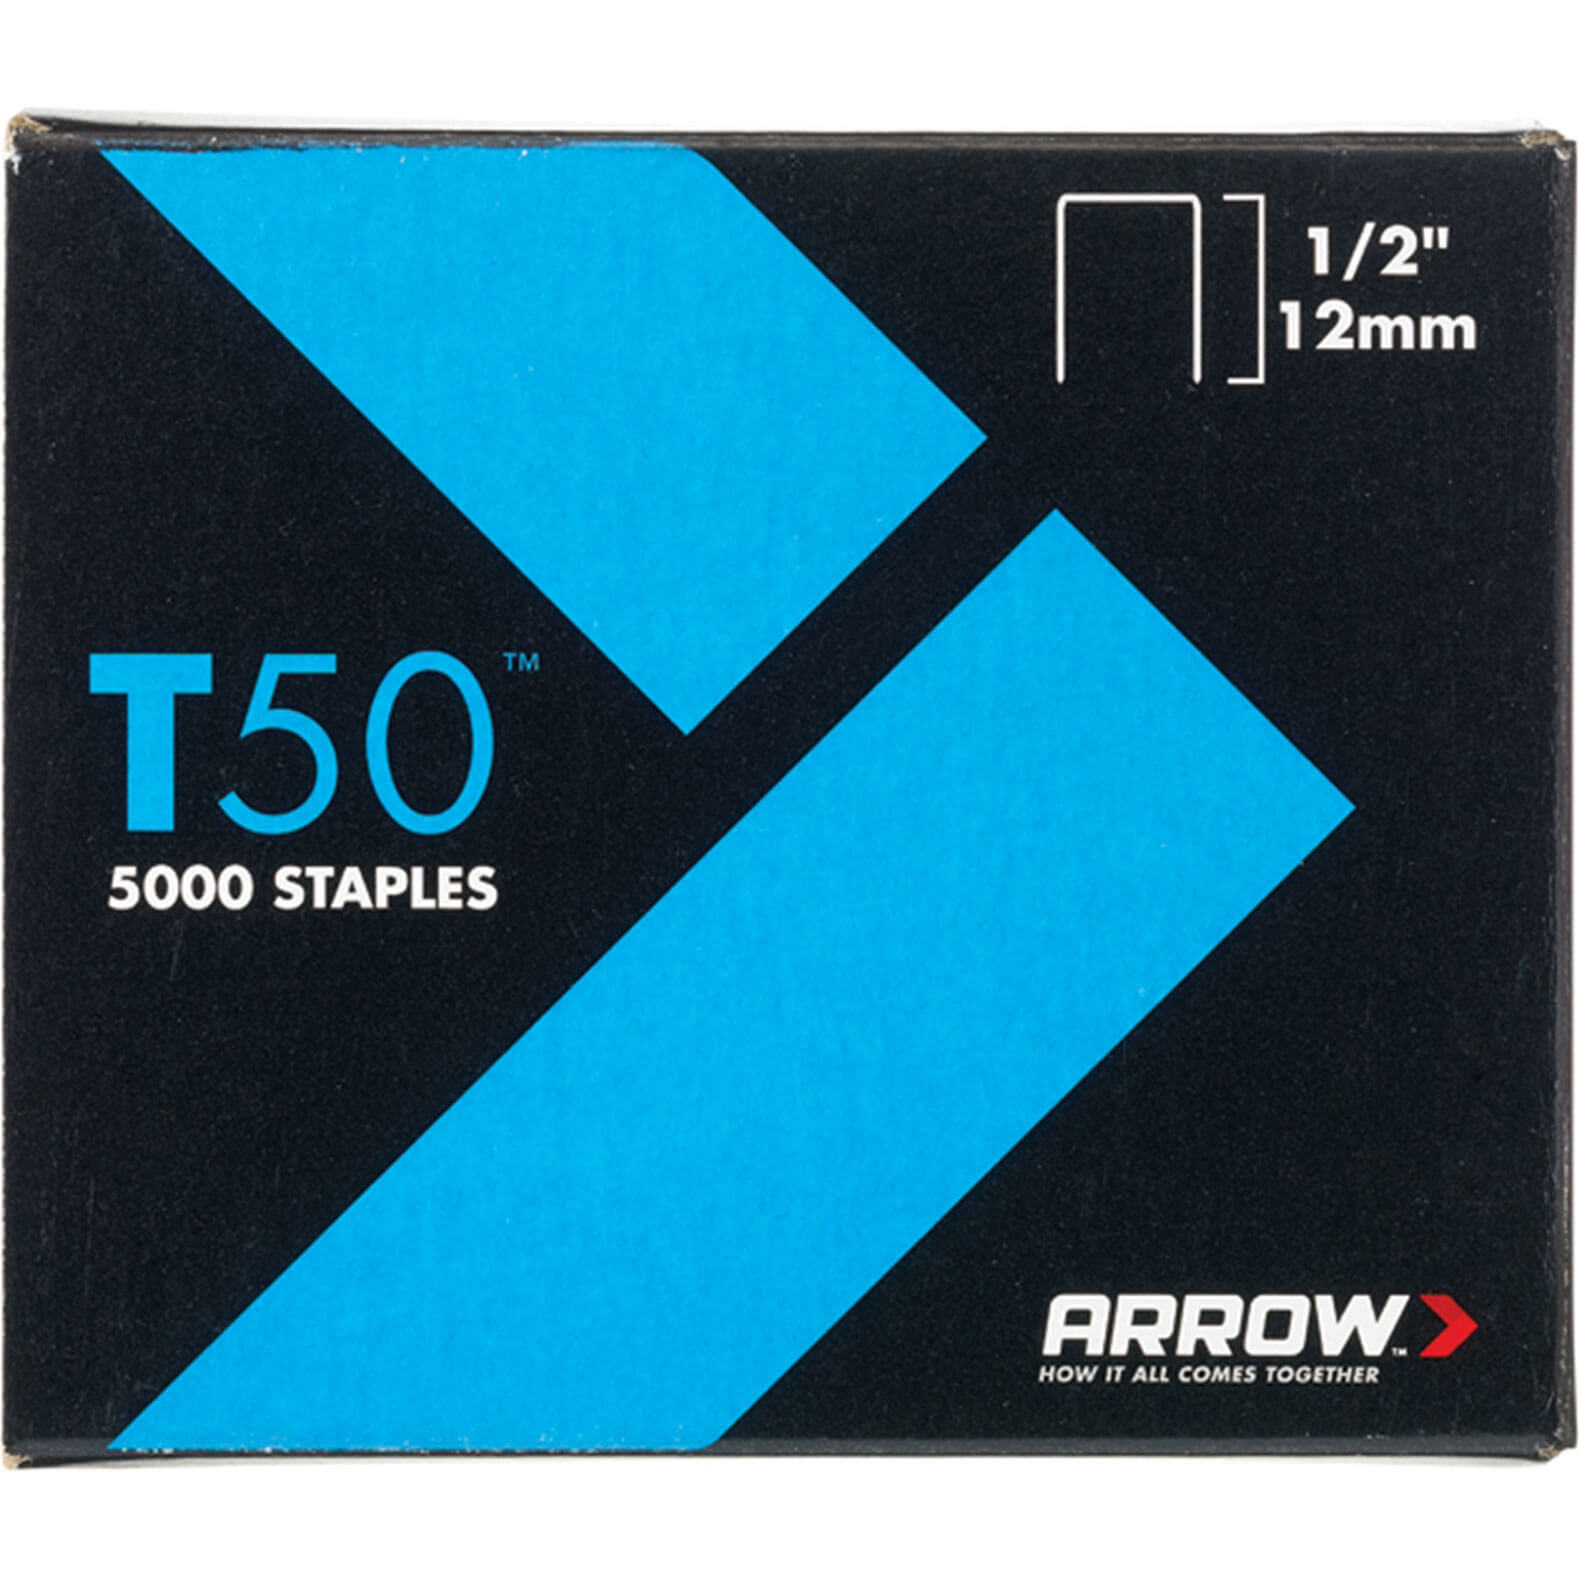 Arrow T50 Staples 12mm / 1/2" Pack of 1250